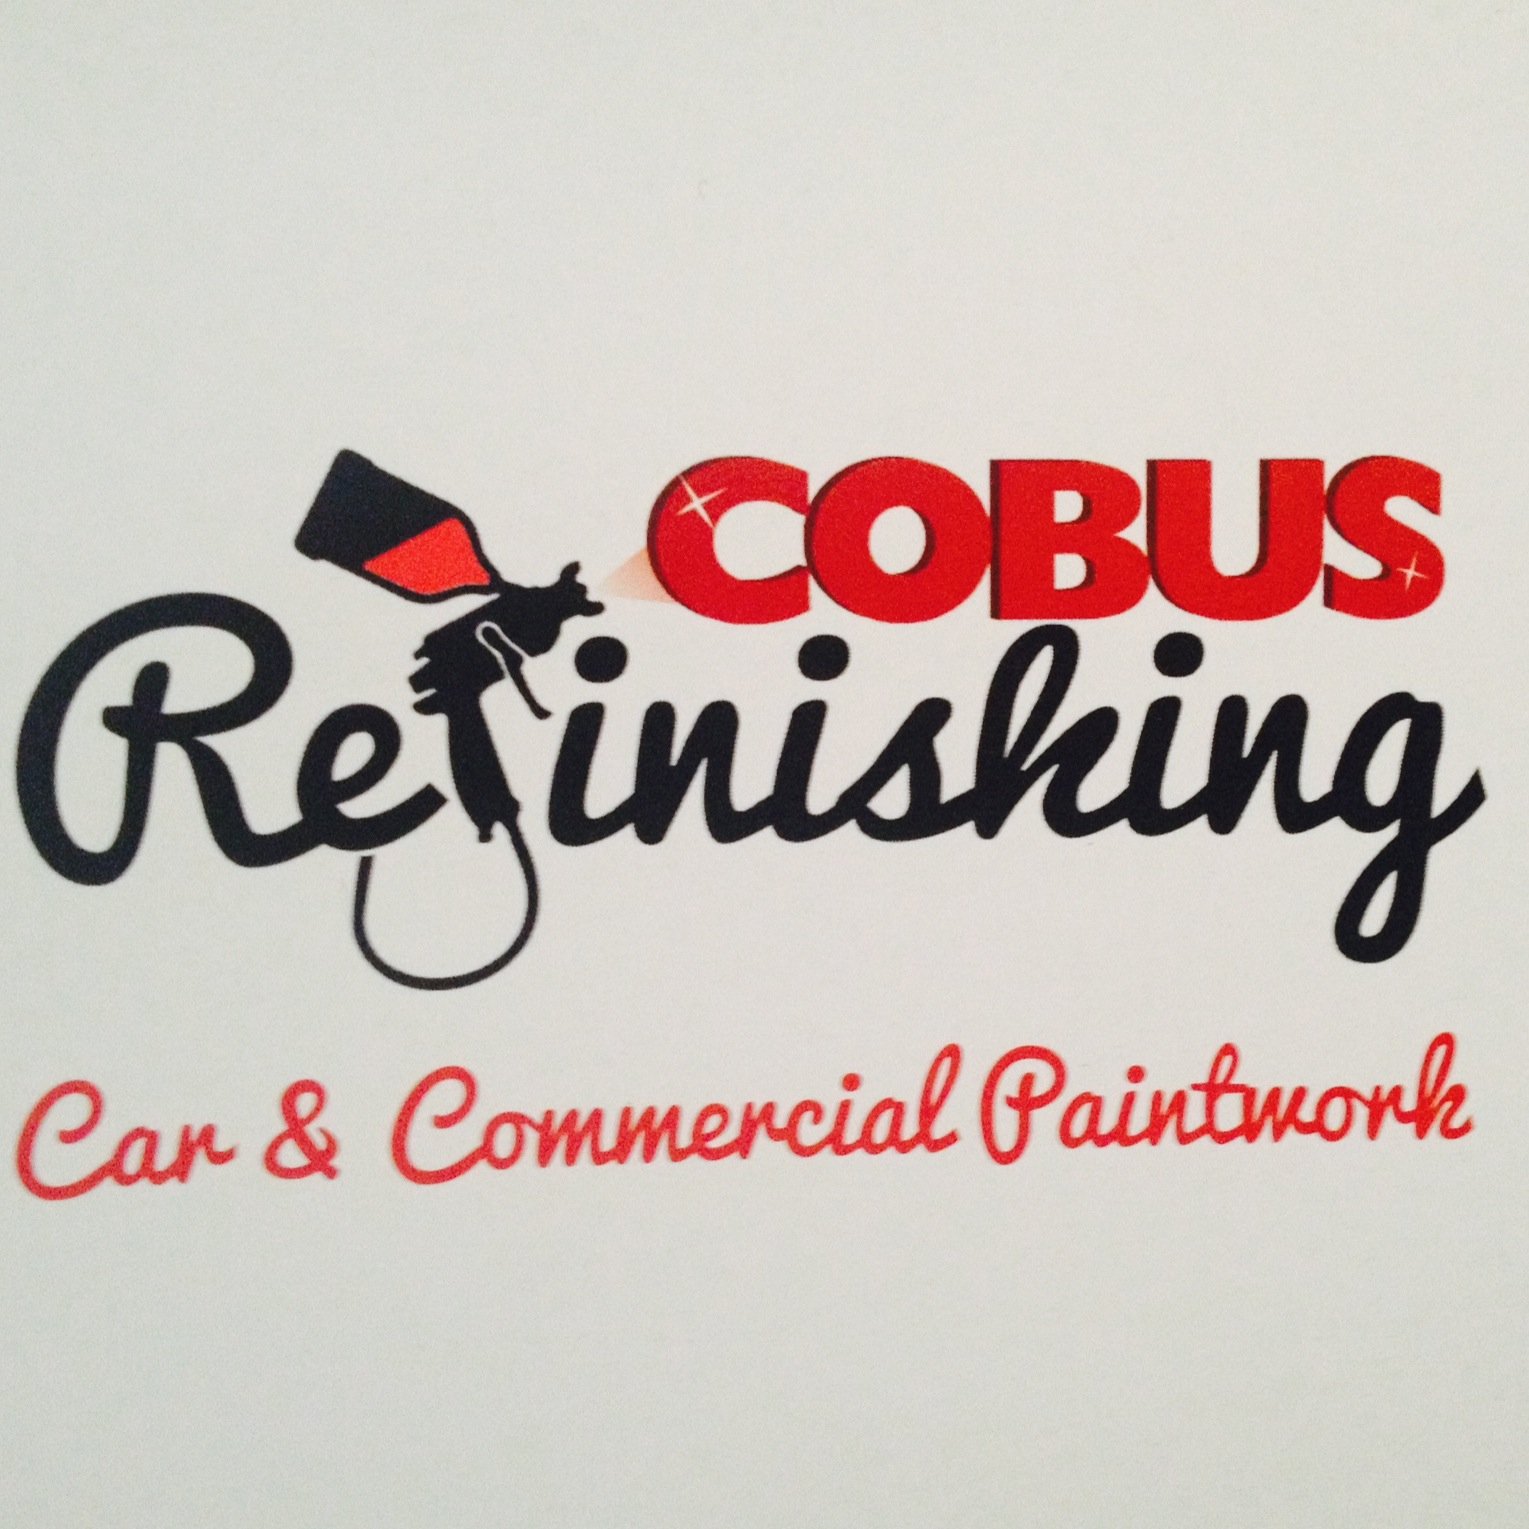 Car & Commercial Paintwork